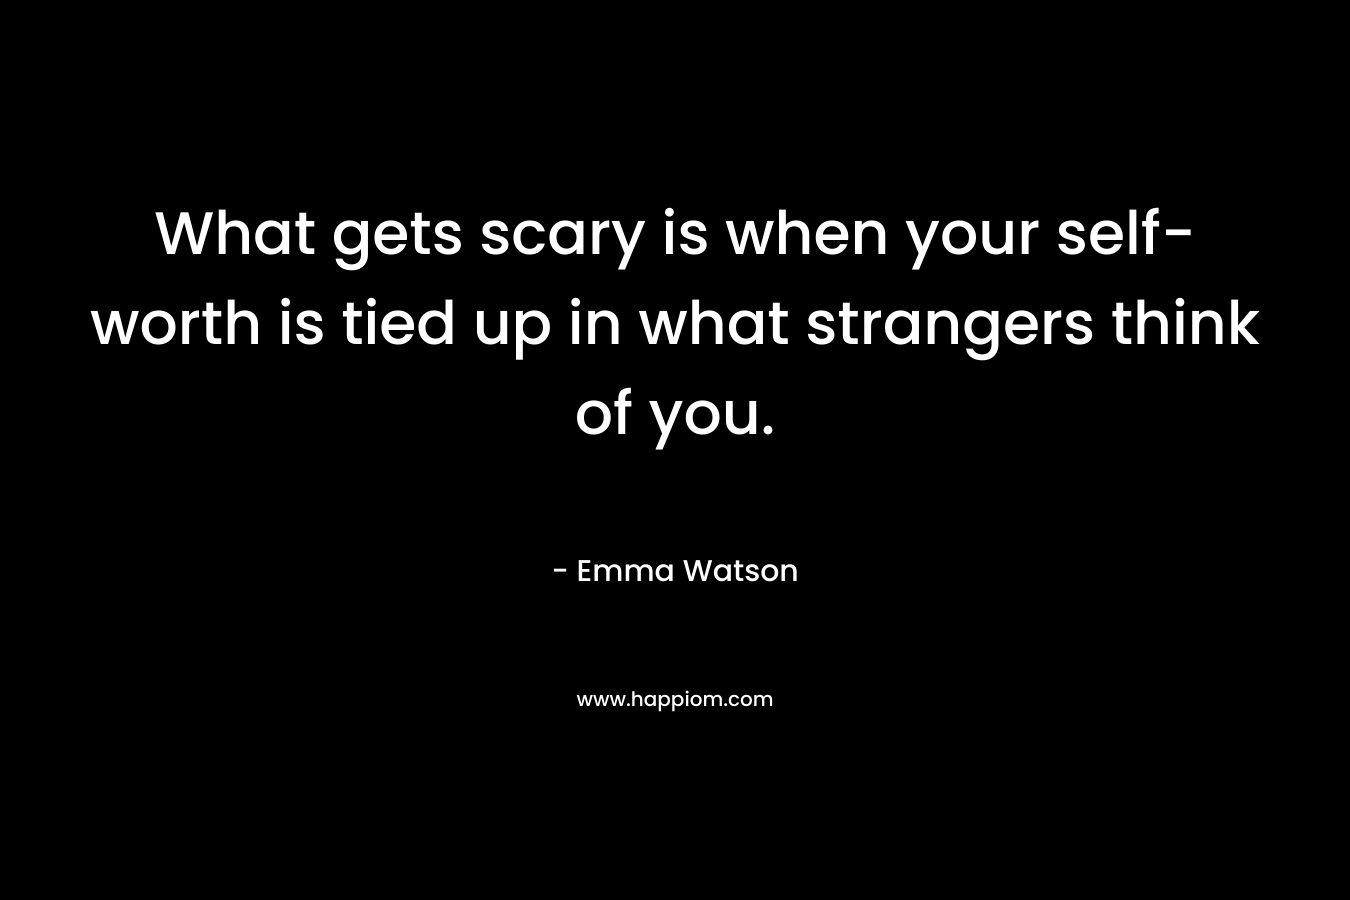 What gets scary is when your self-worth is tied up in what strangers think of you. – Emma Watson